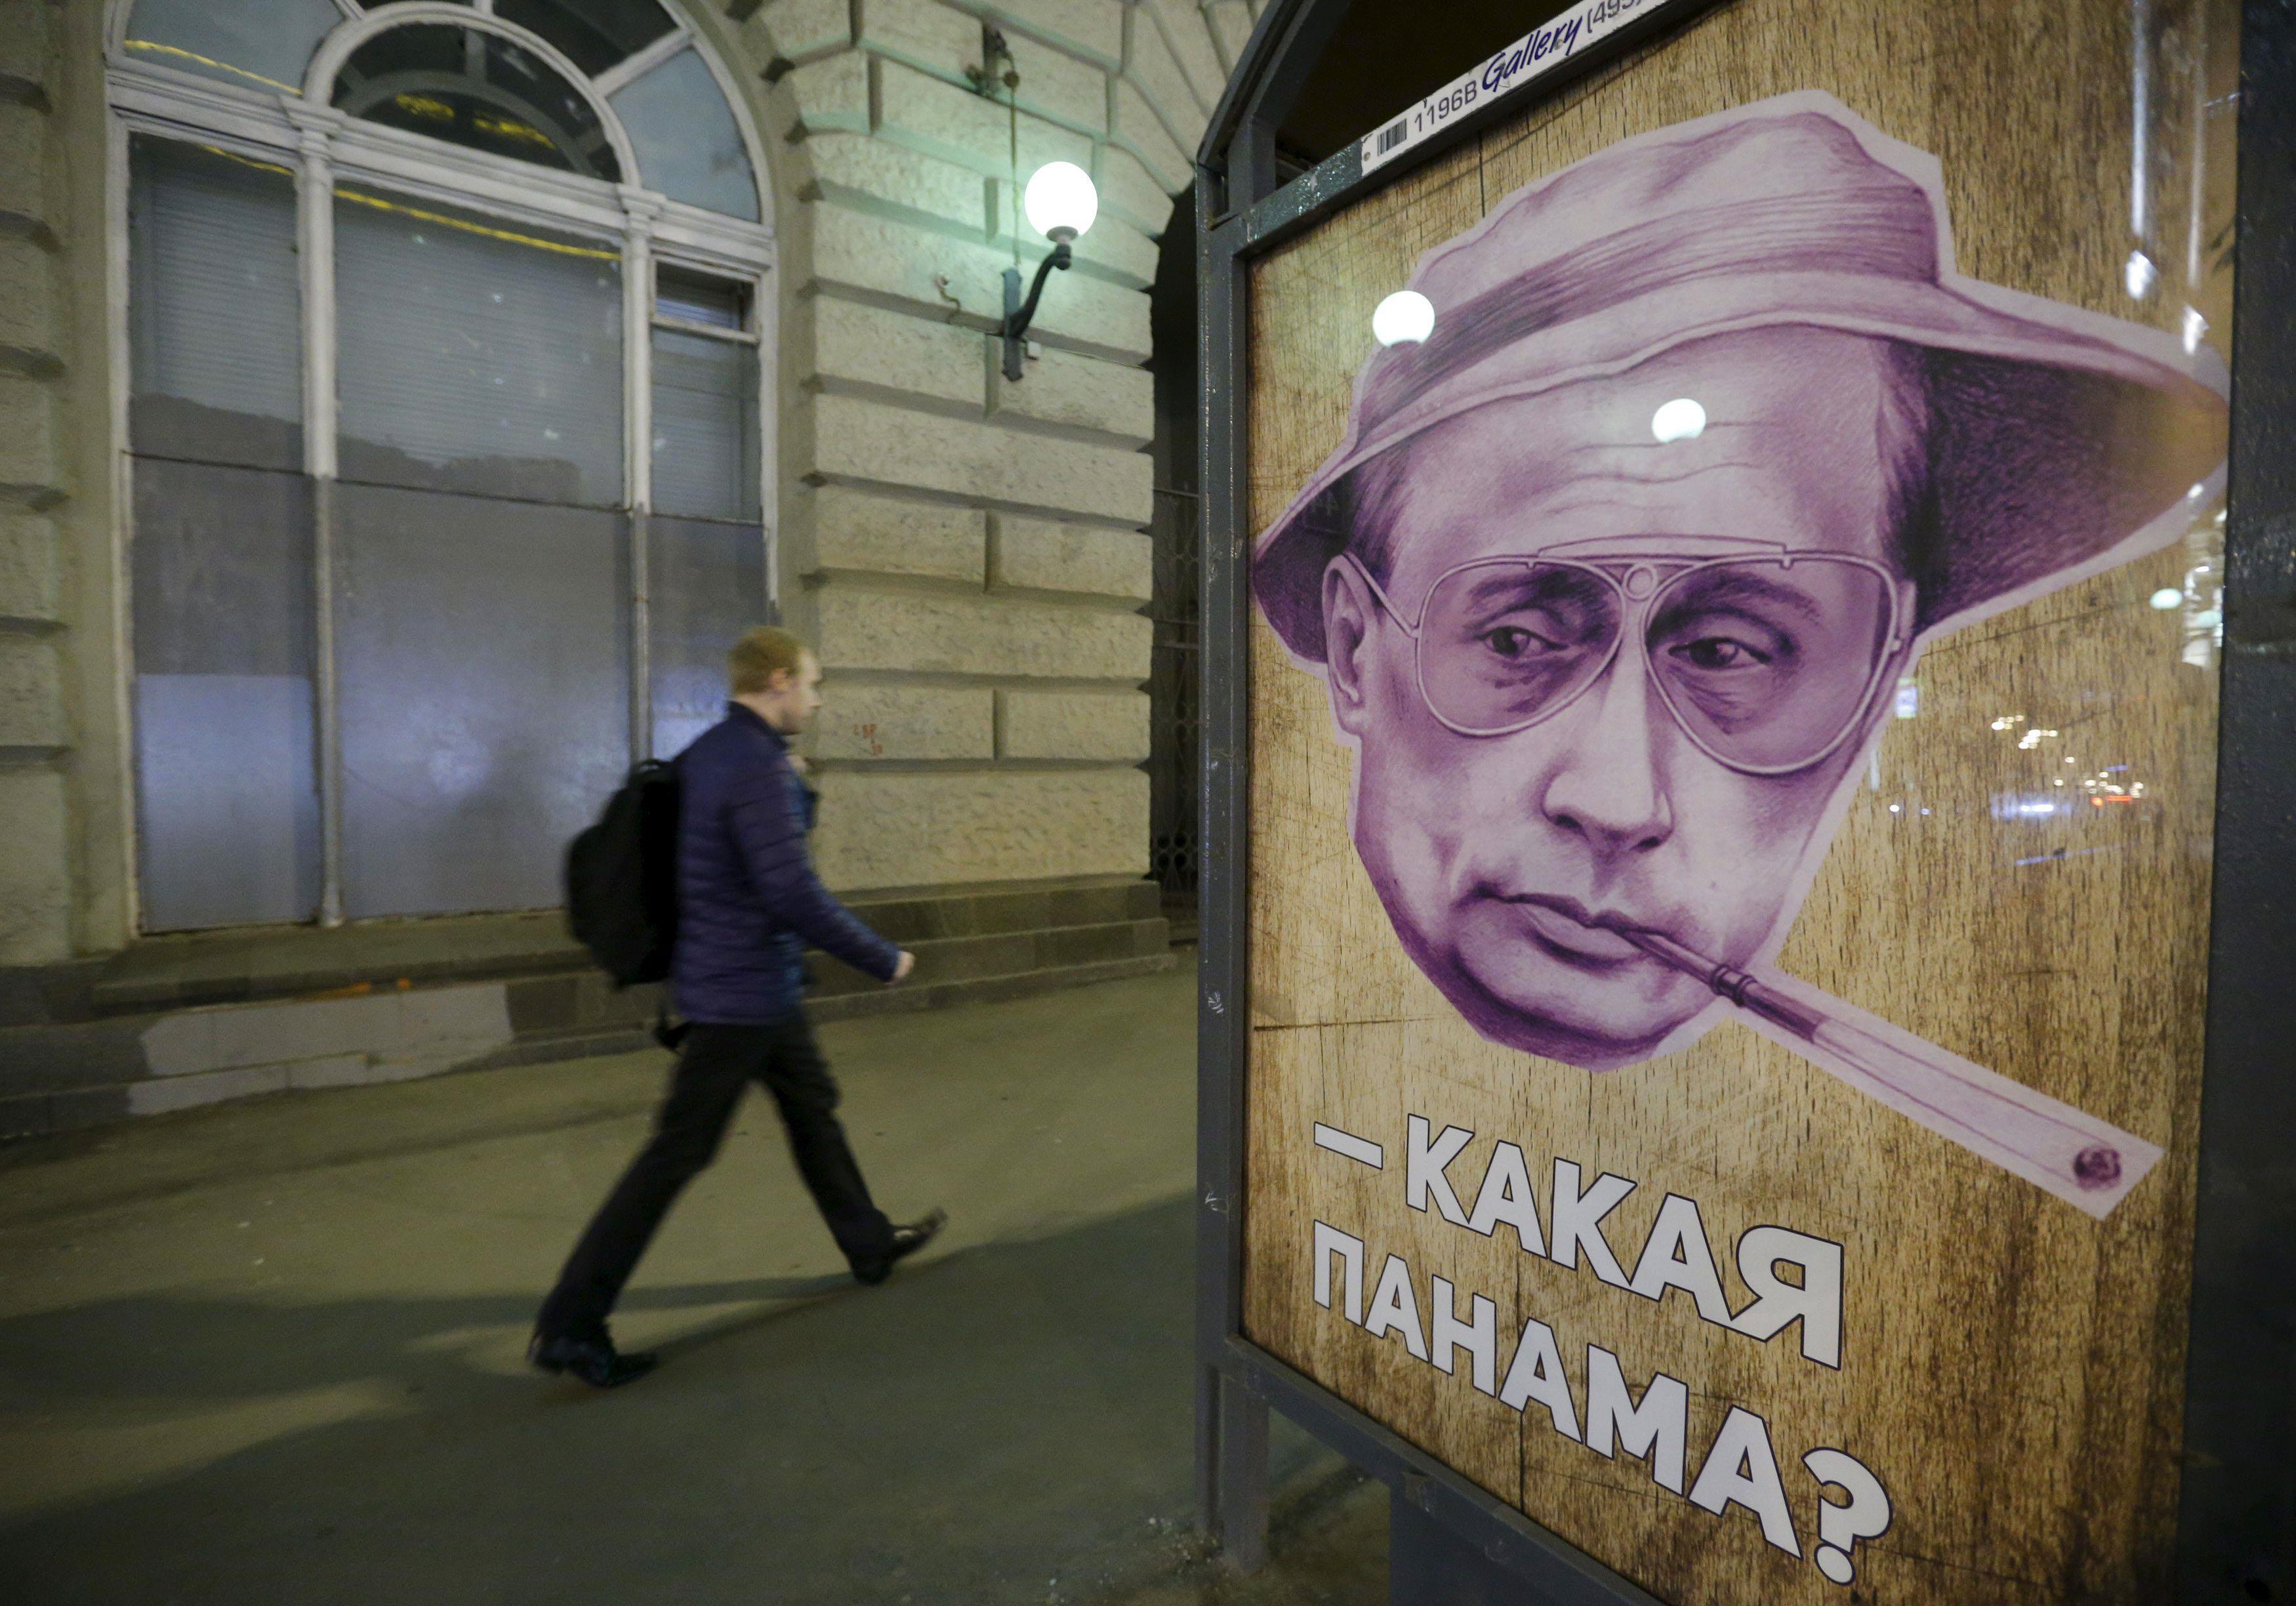 Man walks past poster depicting Russian President Putin at bus stop in Moscow